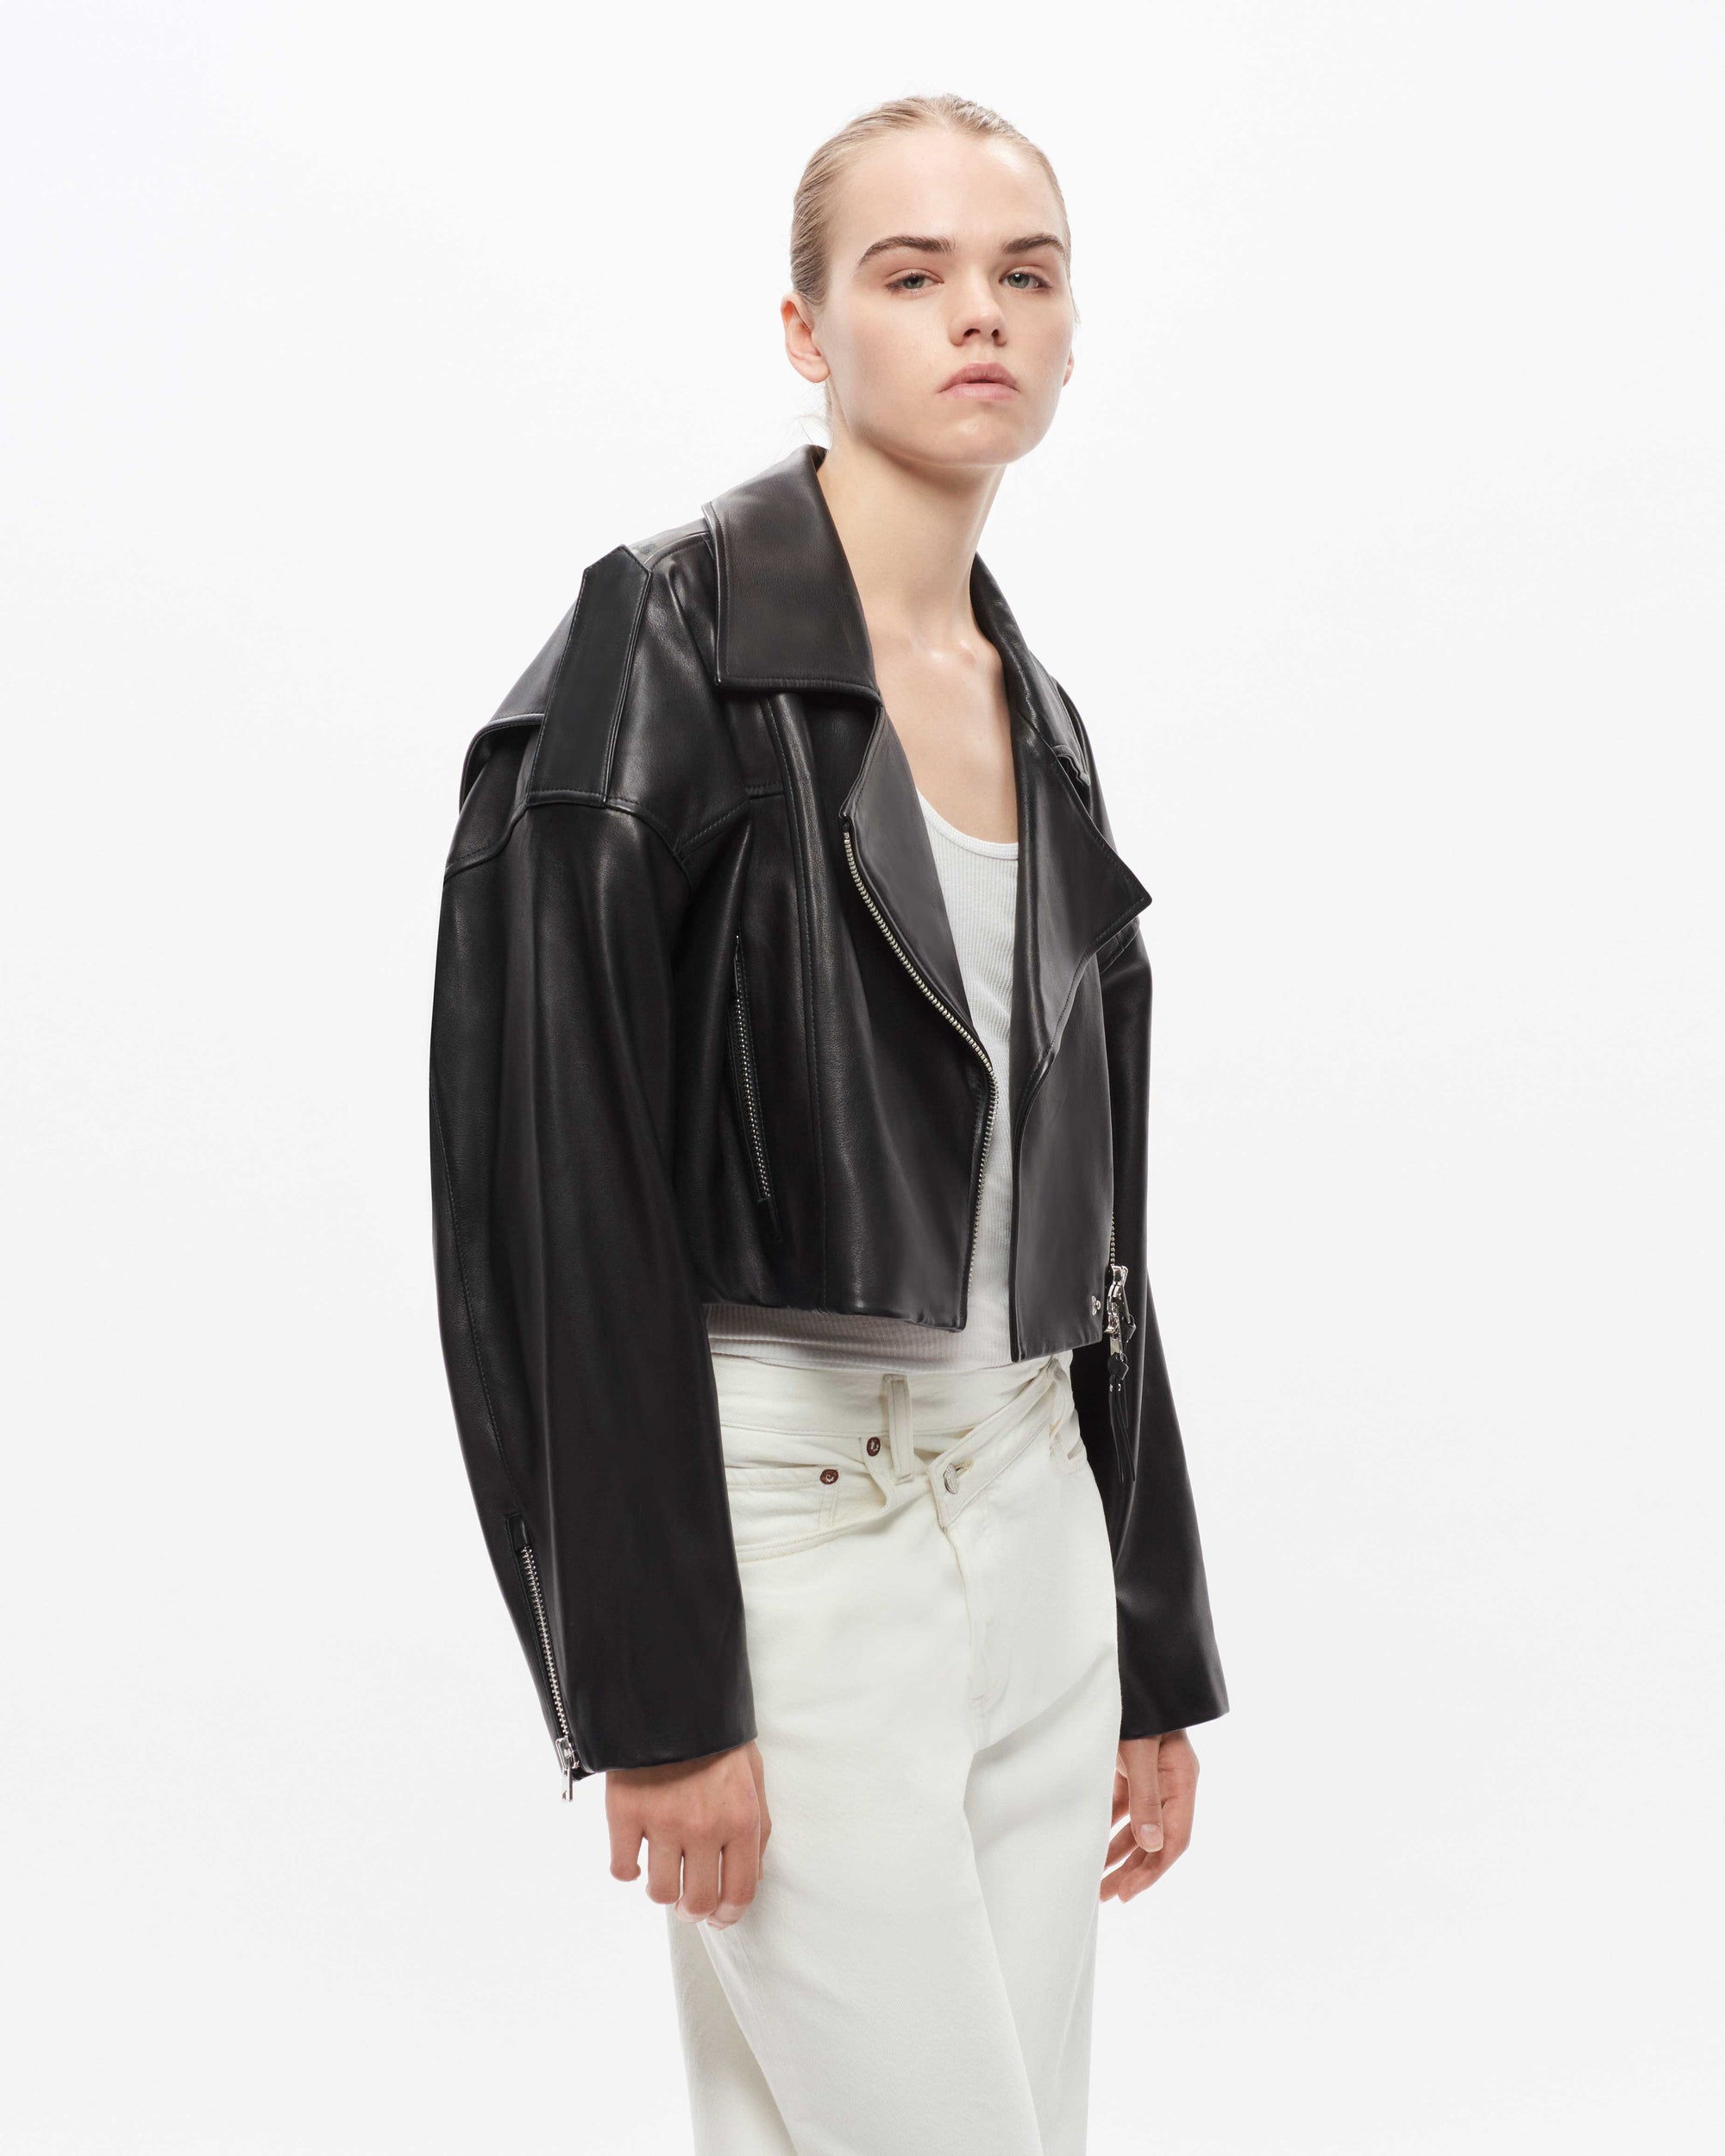 Remi Cropped Leather Biker x AGOLDE